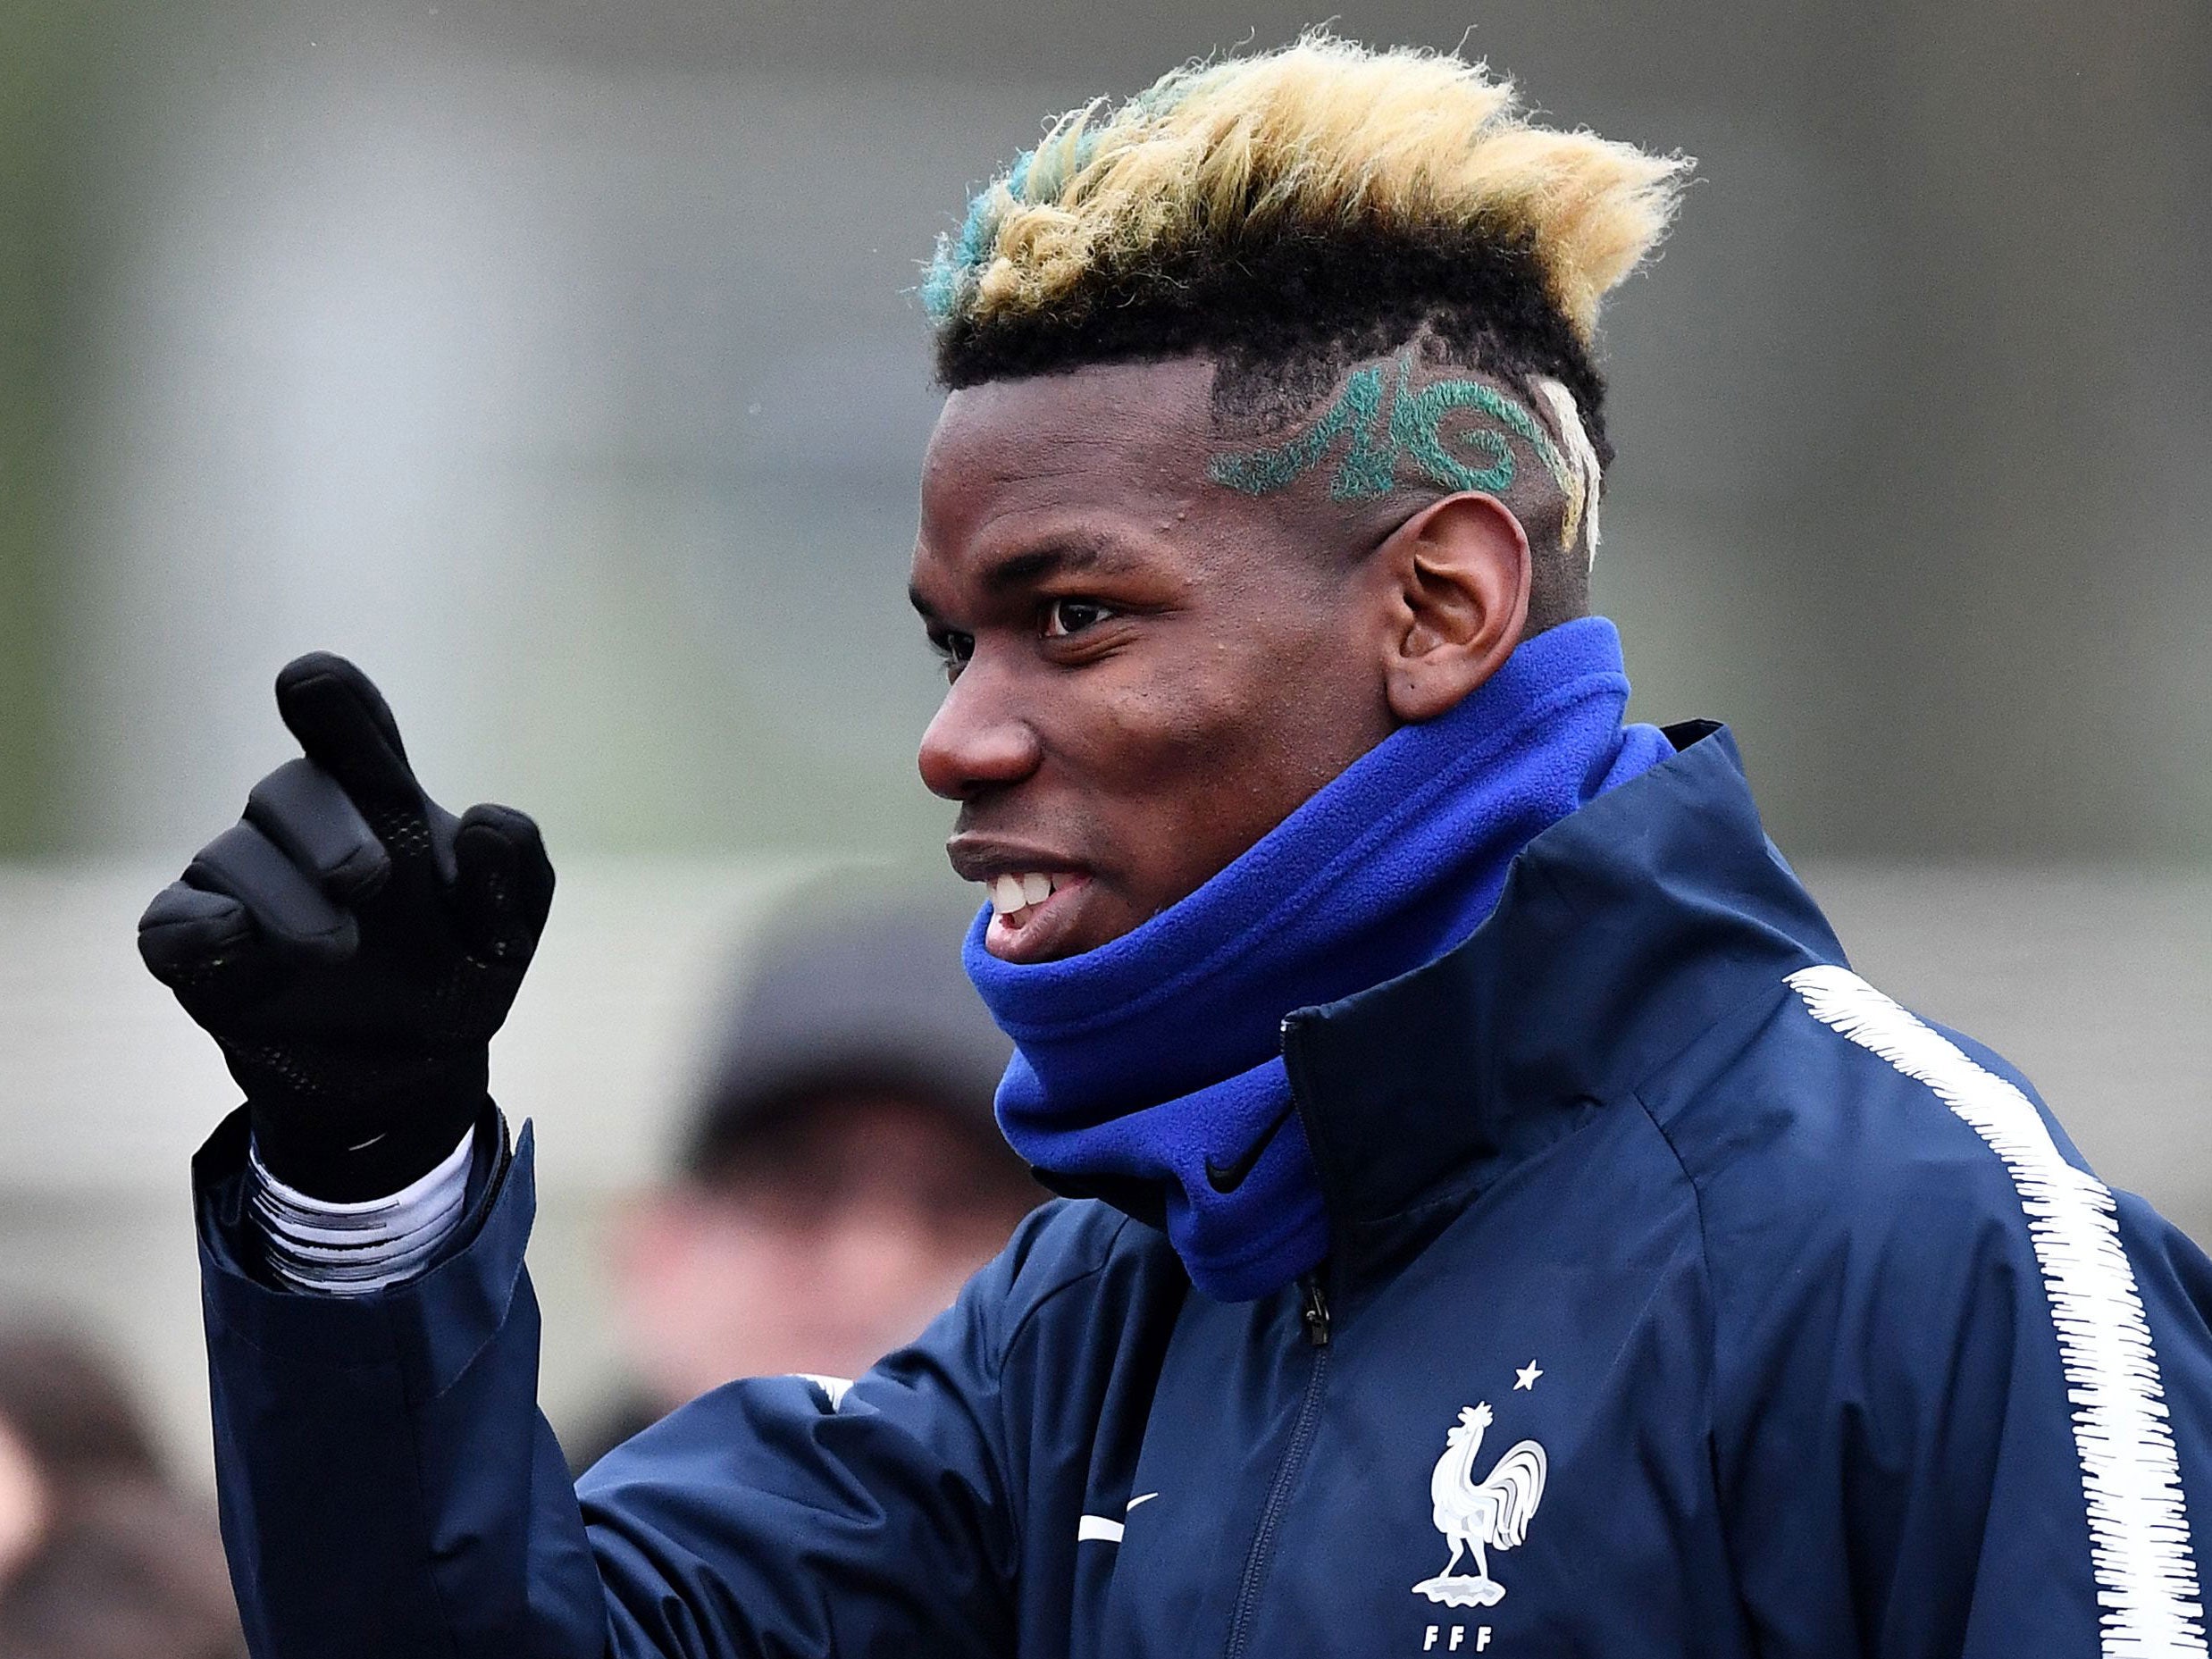 Paul Pogba is currently on international duty with France